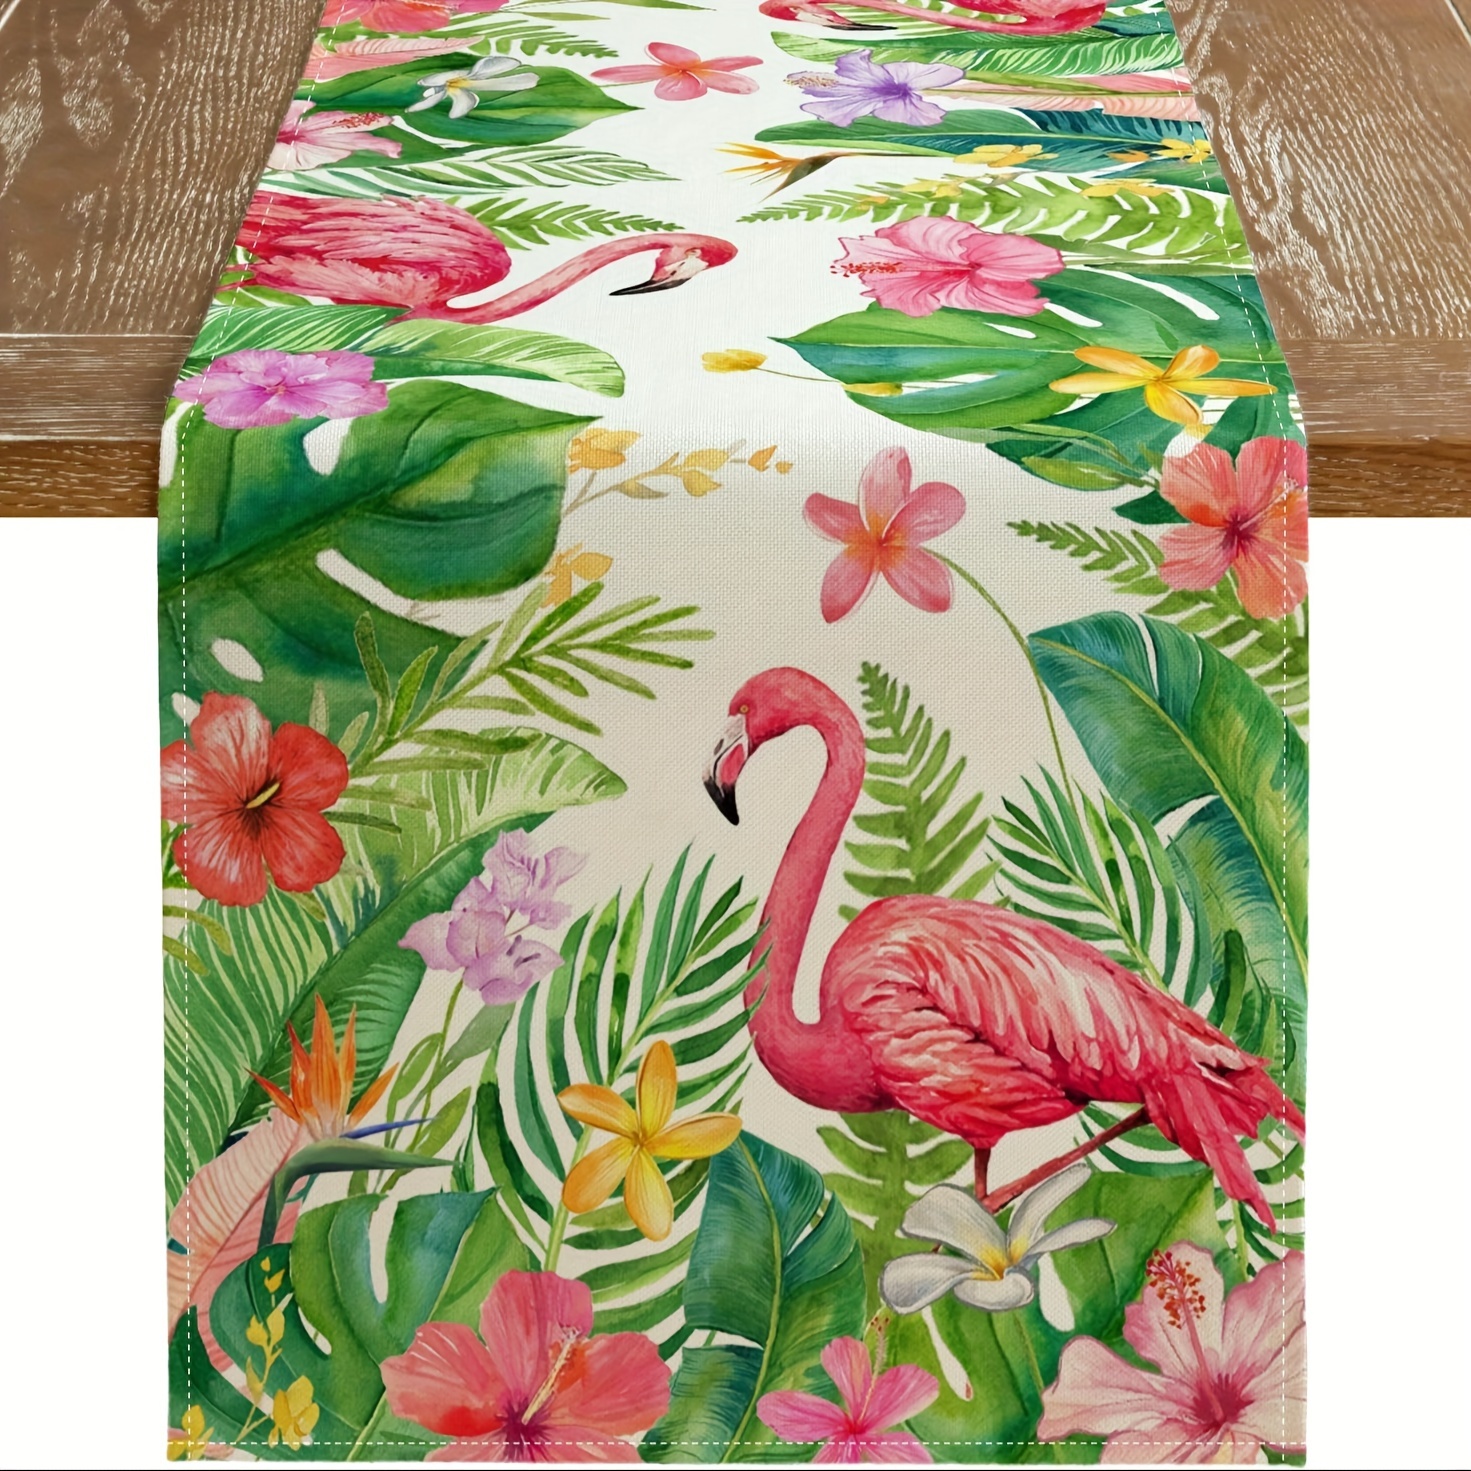 

1pc, Table Runner, Palm Leaf Flamingo Printed Table Runner, Summer Tropical Theme Dustproof & Wipe Clean Table Runner, Perfect For Home Party Decor, Dining Table Decoration, Aesthetic Room Decor